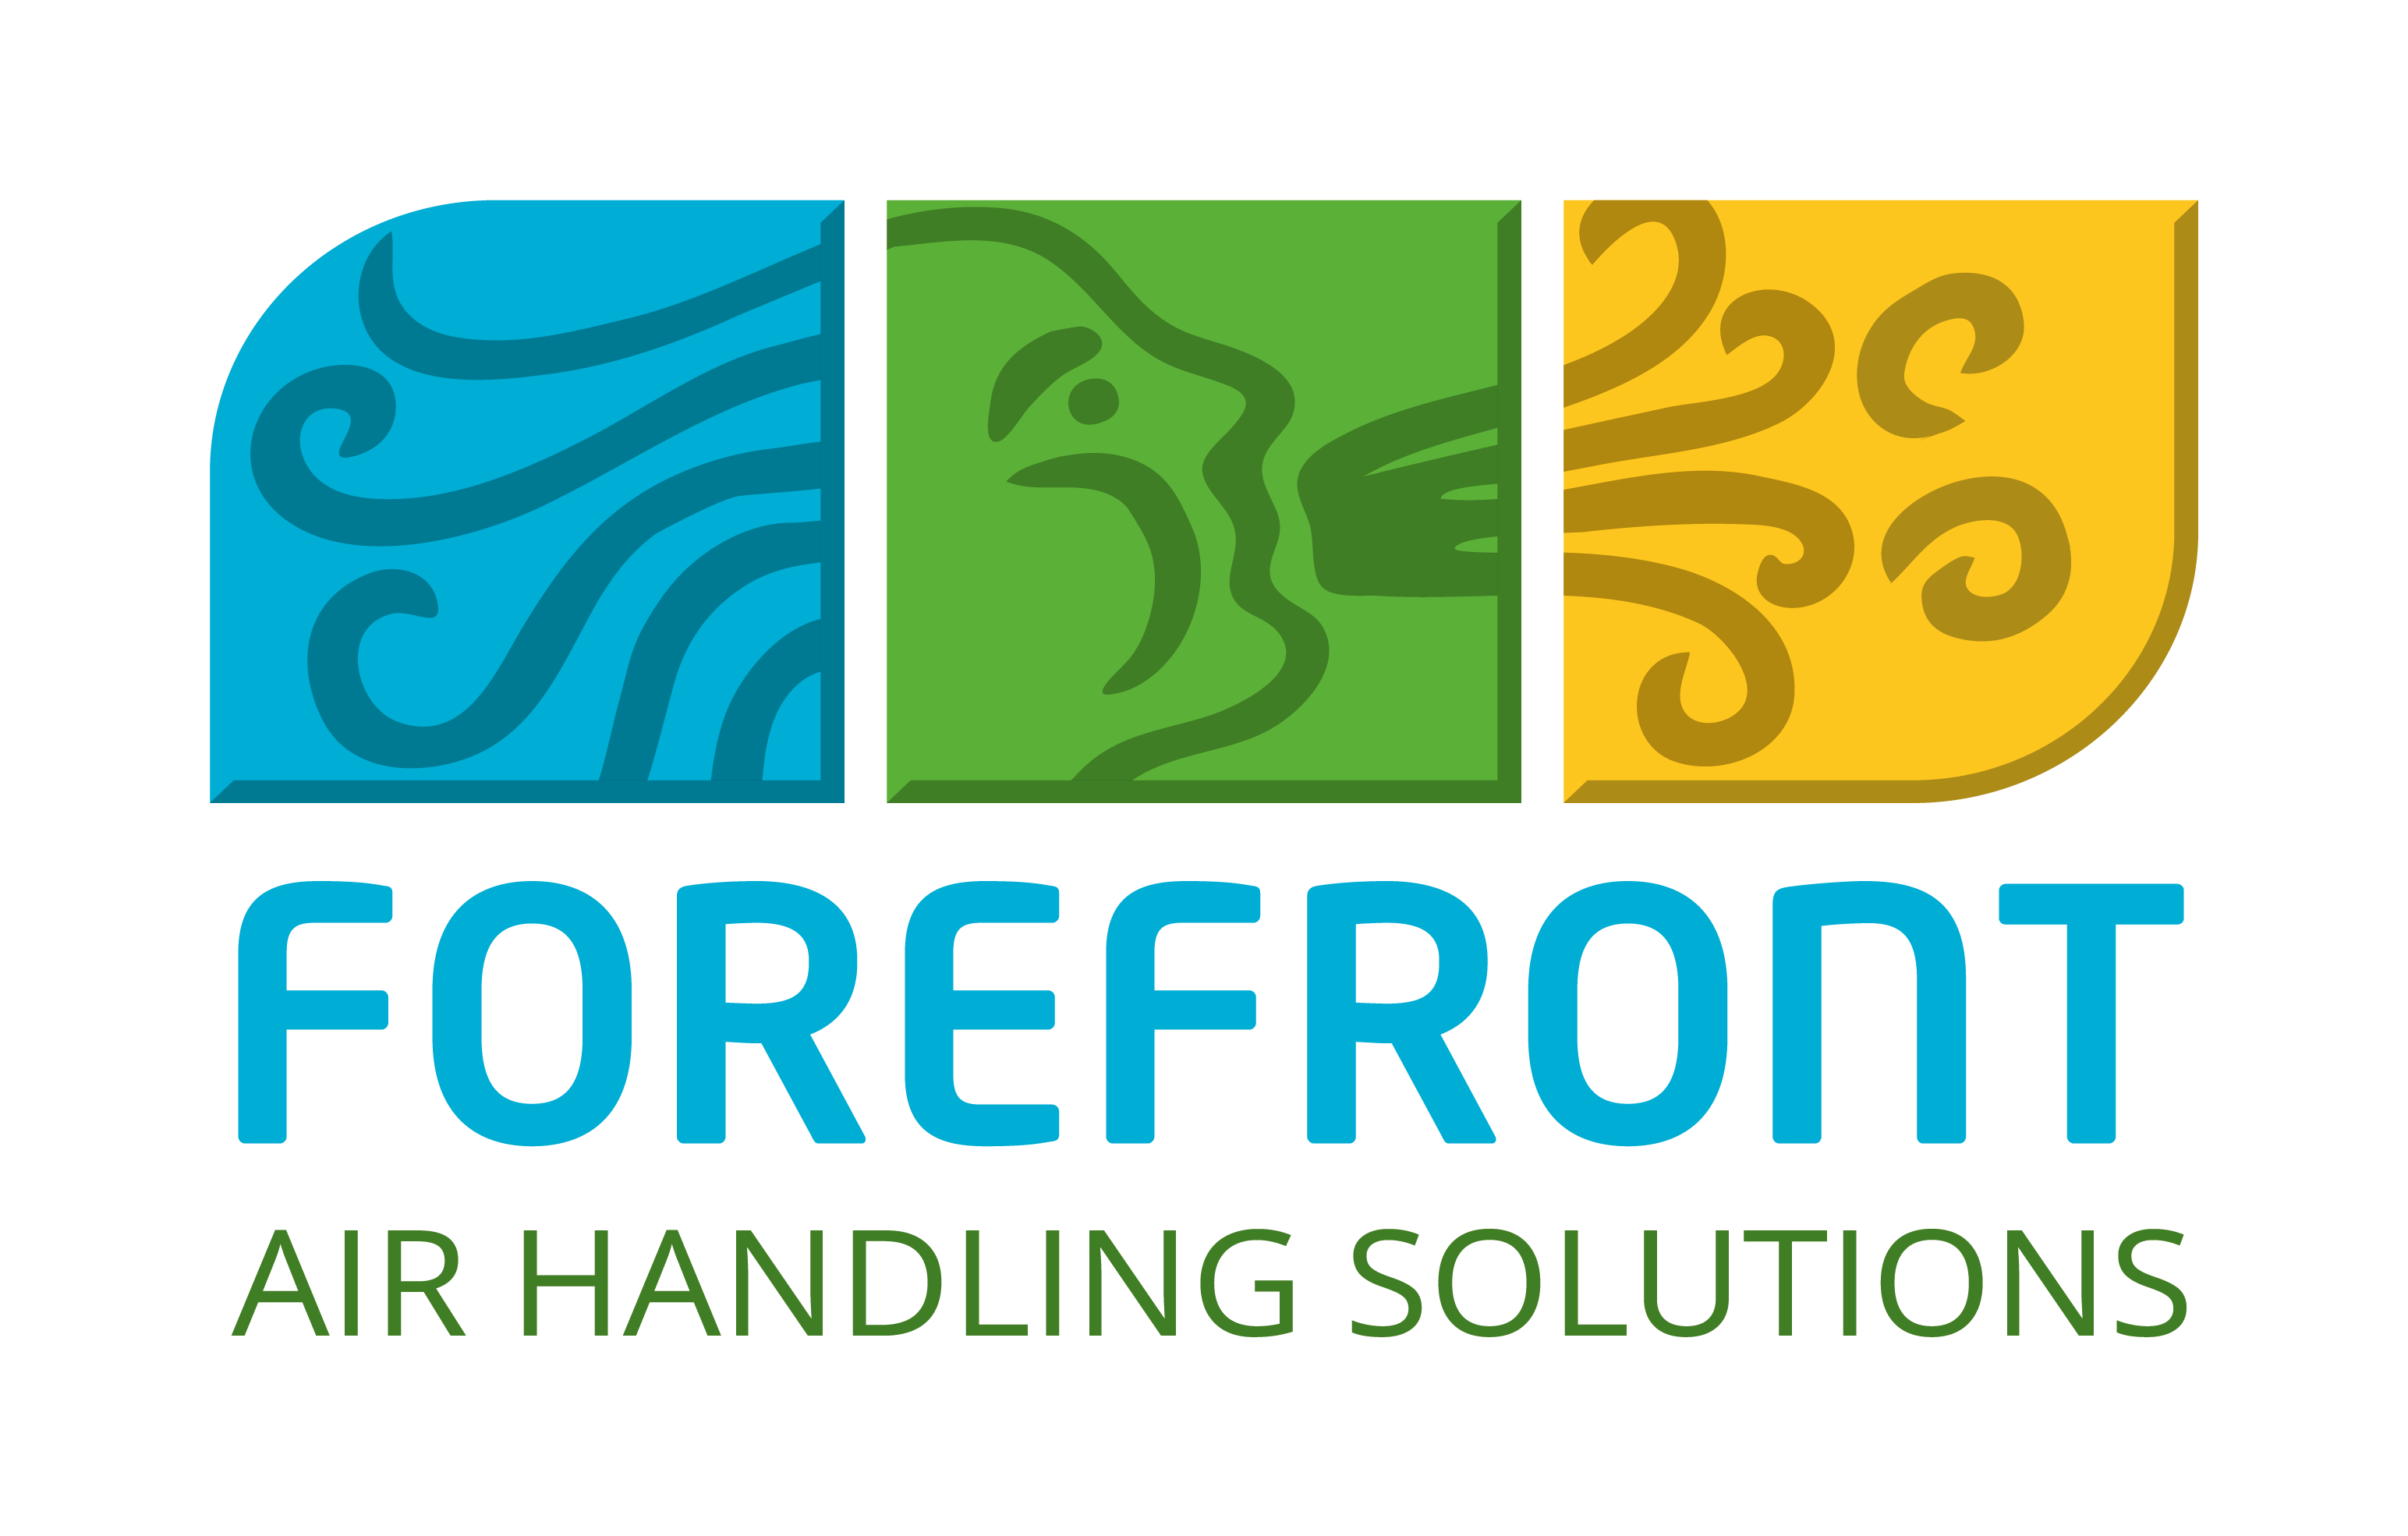 Forefront Air Handling Solutions